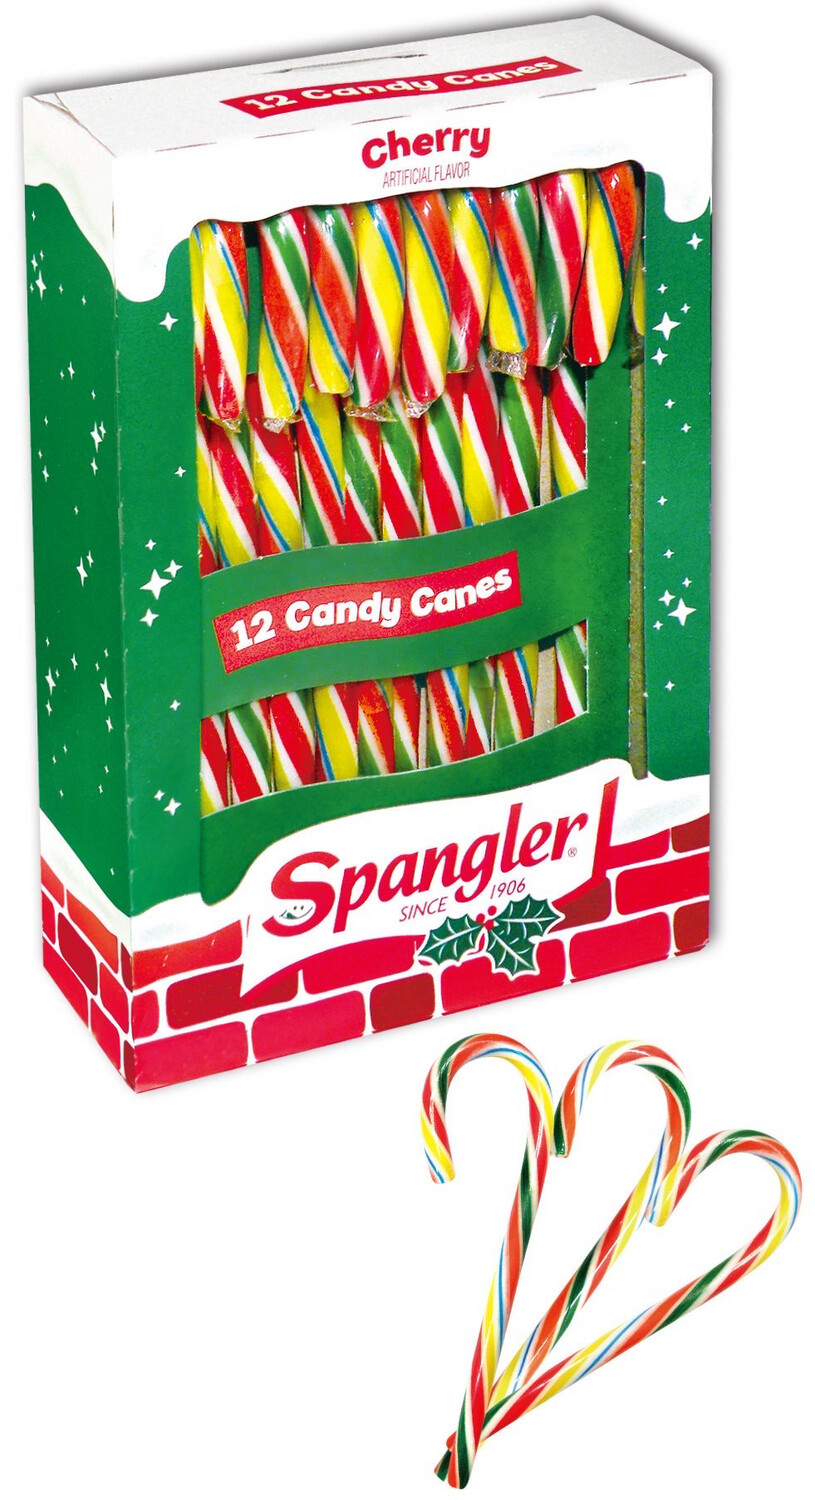 Spangler Cherry Candy Canes 12 pack 